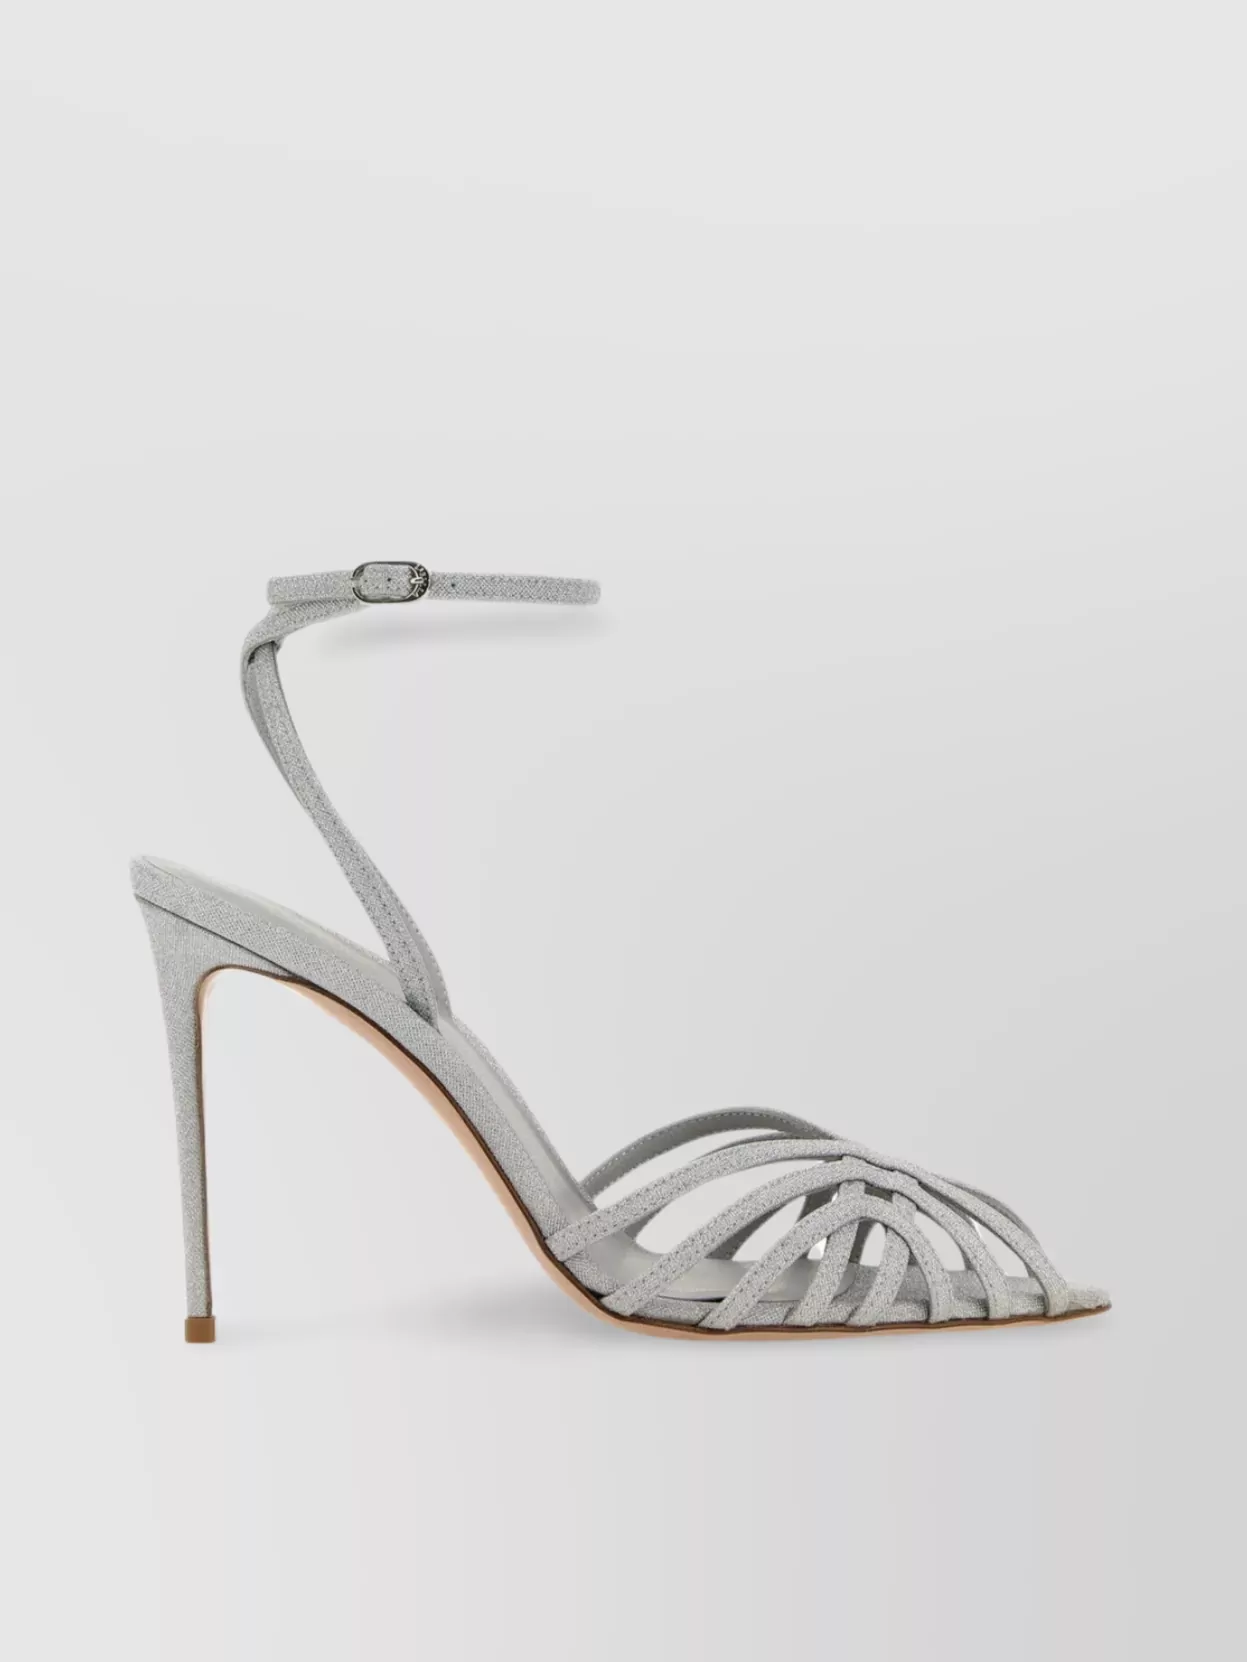 Shop Le Silla Embrace Sandals With Italian Heel And Pointed Toe